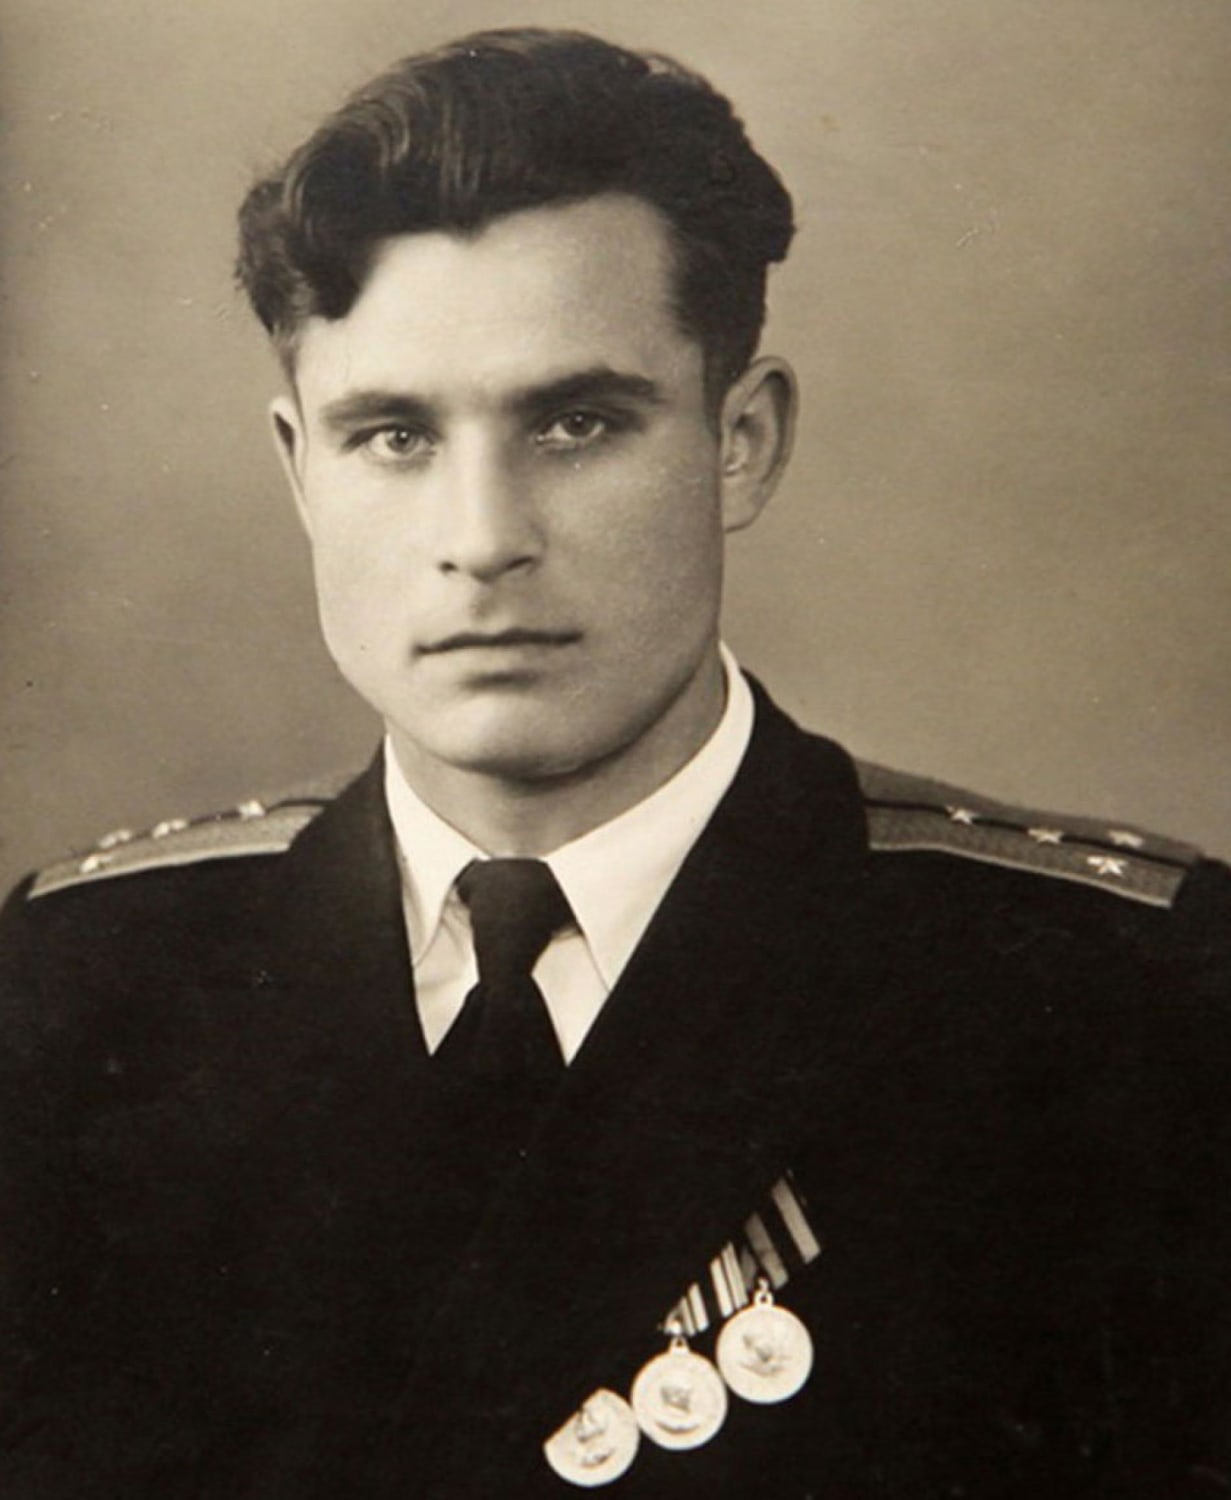 Happy Vasily Arkhipov Day! On October 27th, 1962, Vasily was in a nuclear sub near Florida during the Cuban Middle Crisis. The sub’s captain thought WWIII had started and wanted to nuke the U.S., Vasily refused the captain, preventing WWIII and saving millions of lives. ~ 1960’s